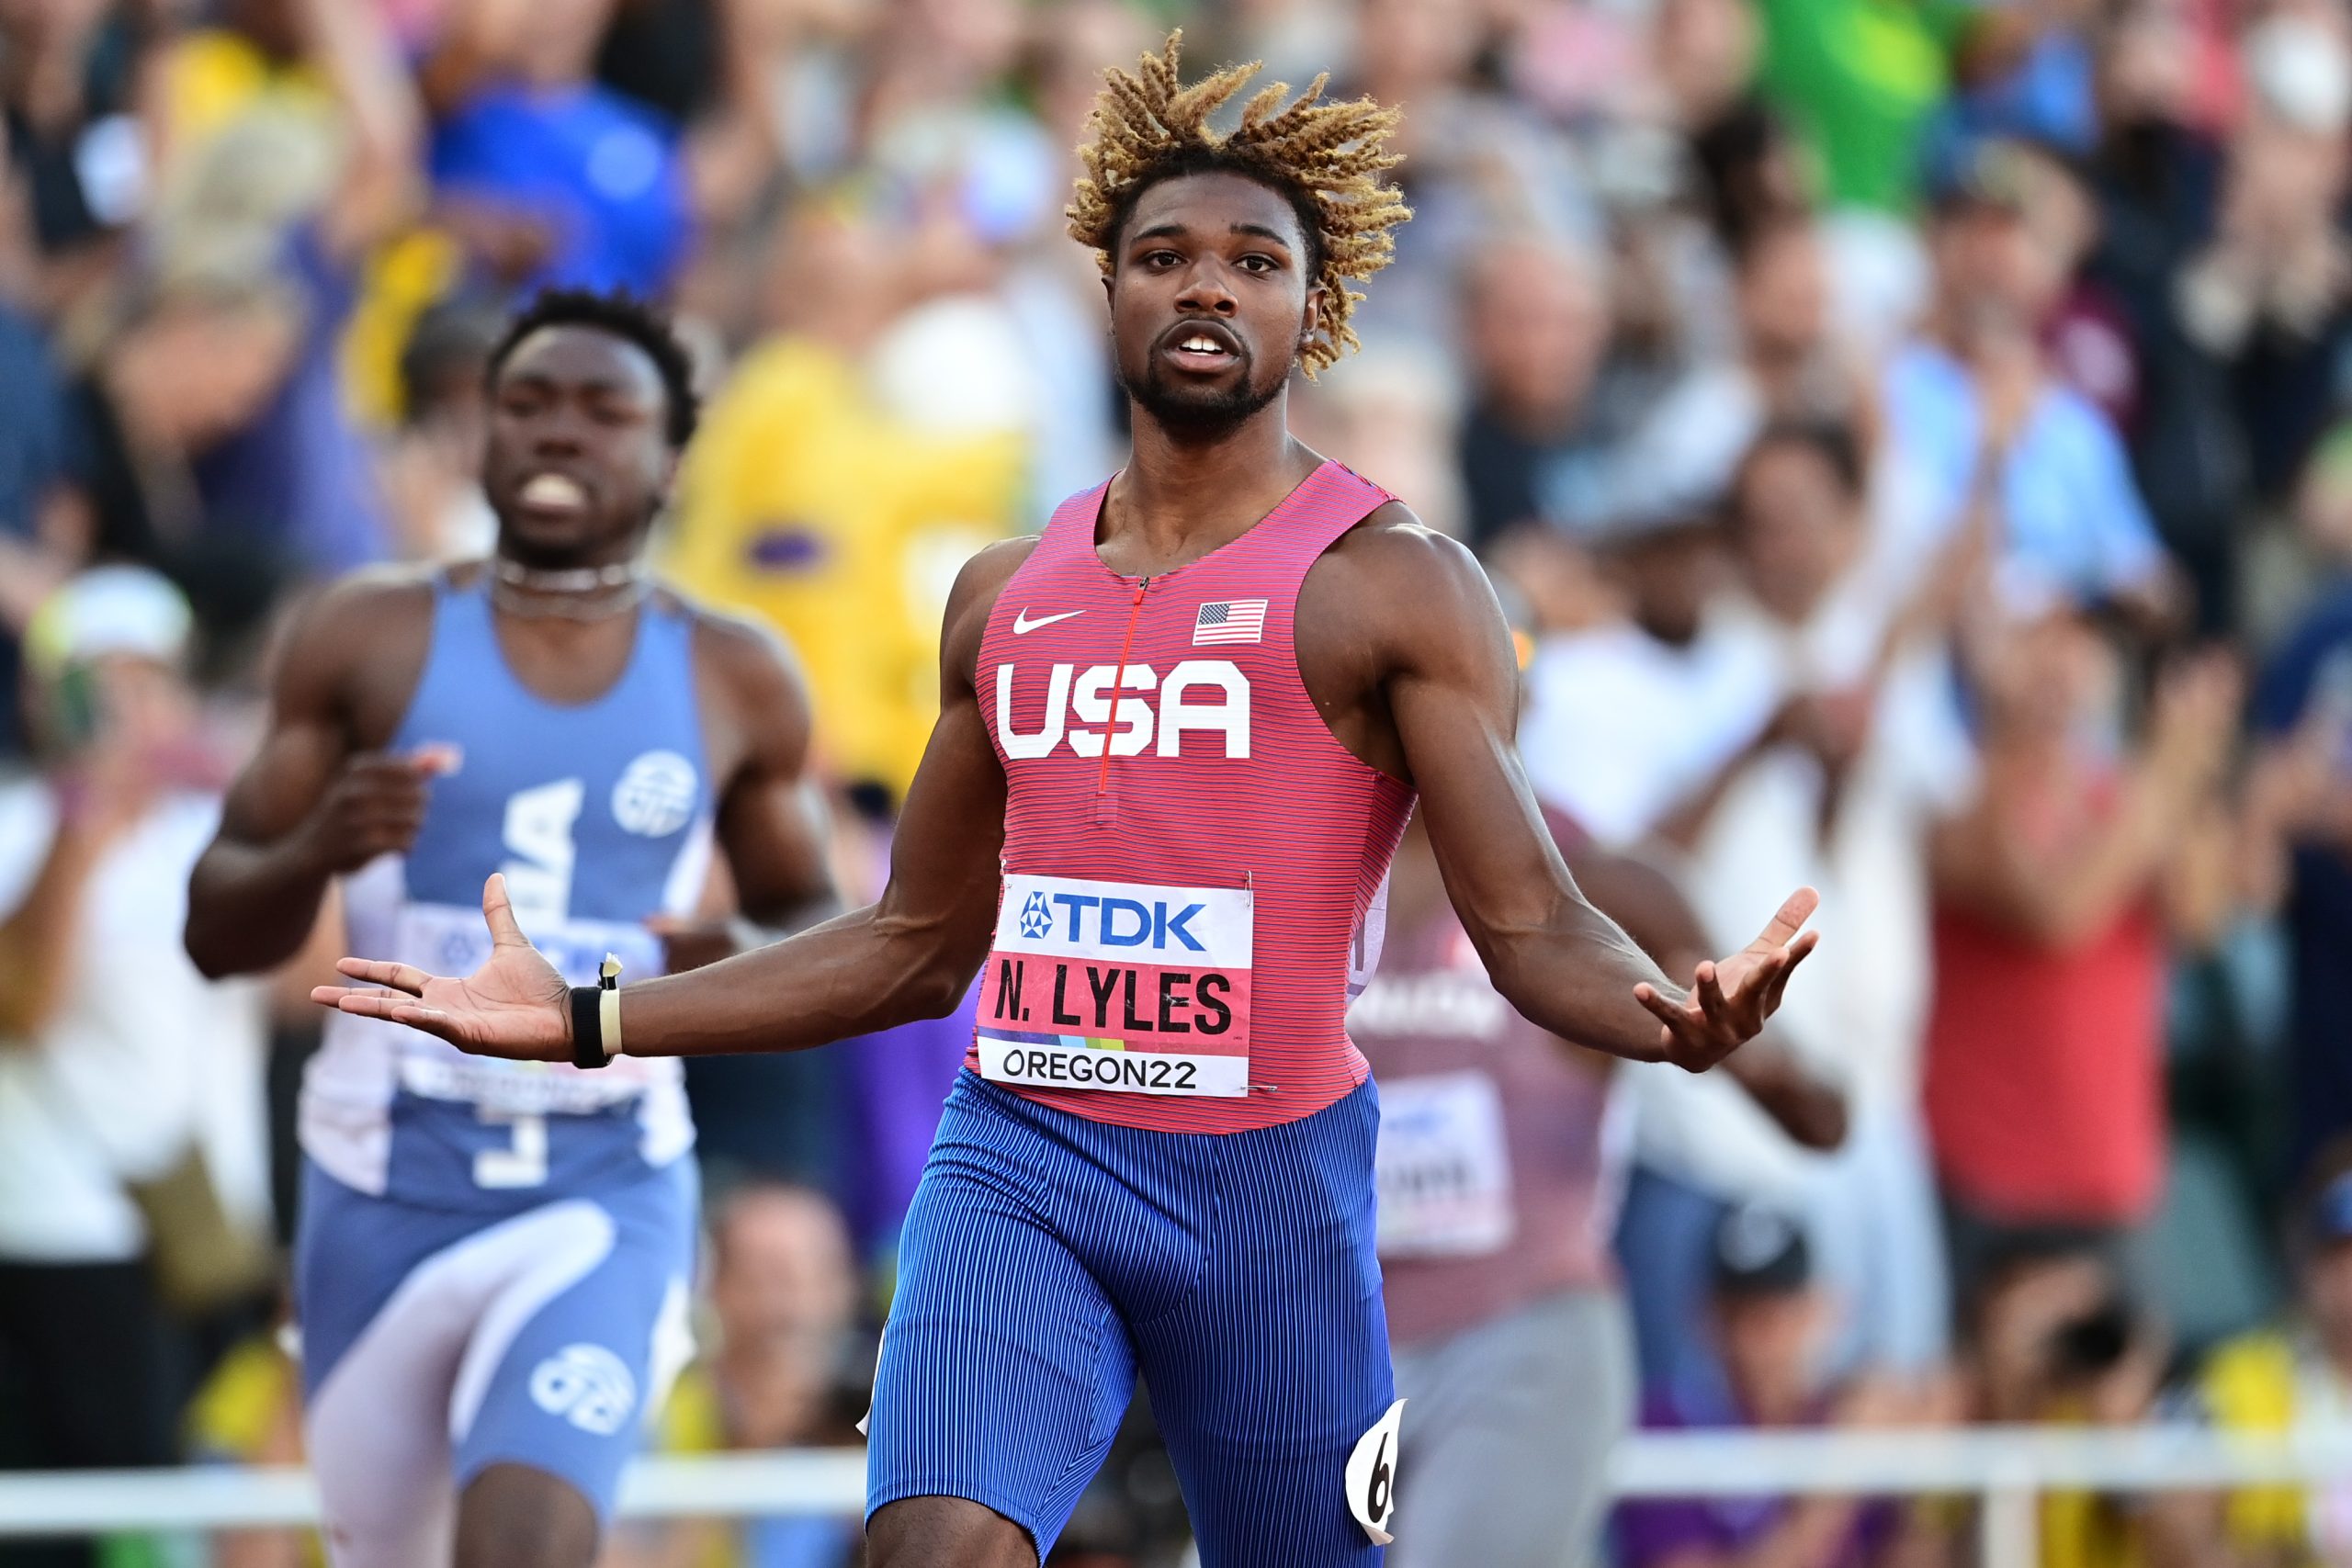 Noah Lyles defends his 200m world title with an American record of 19.31 at Oregon22